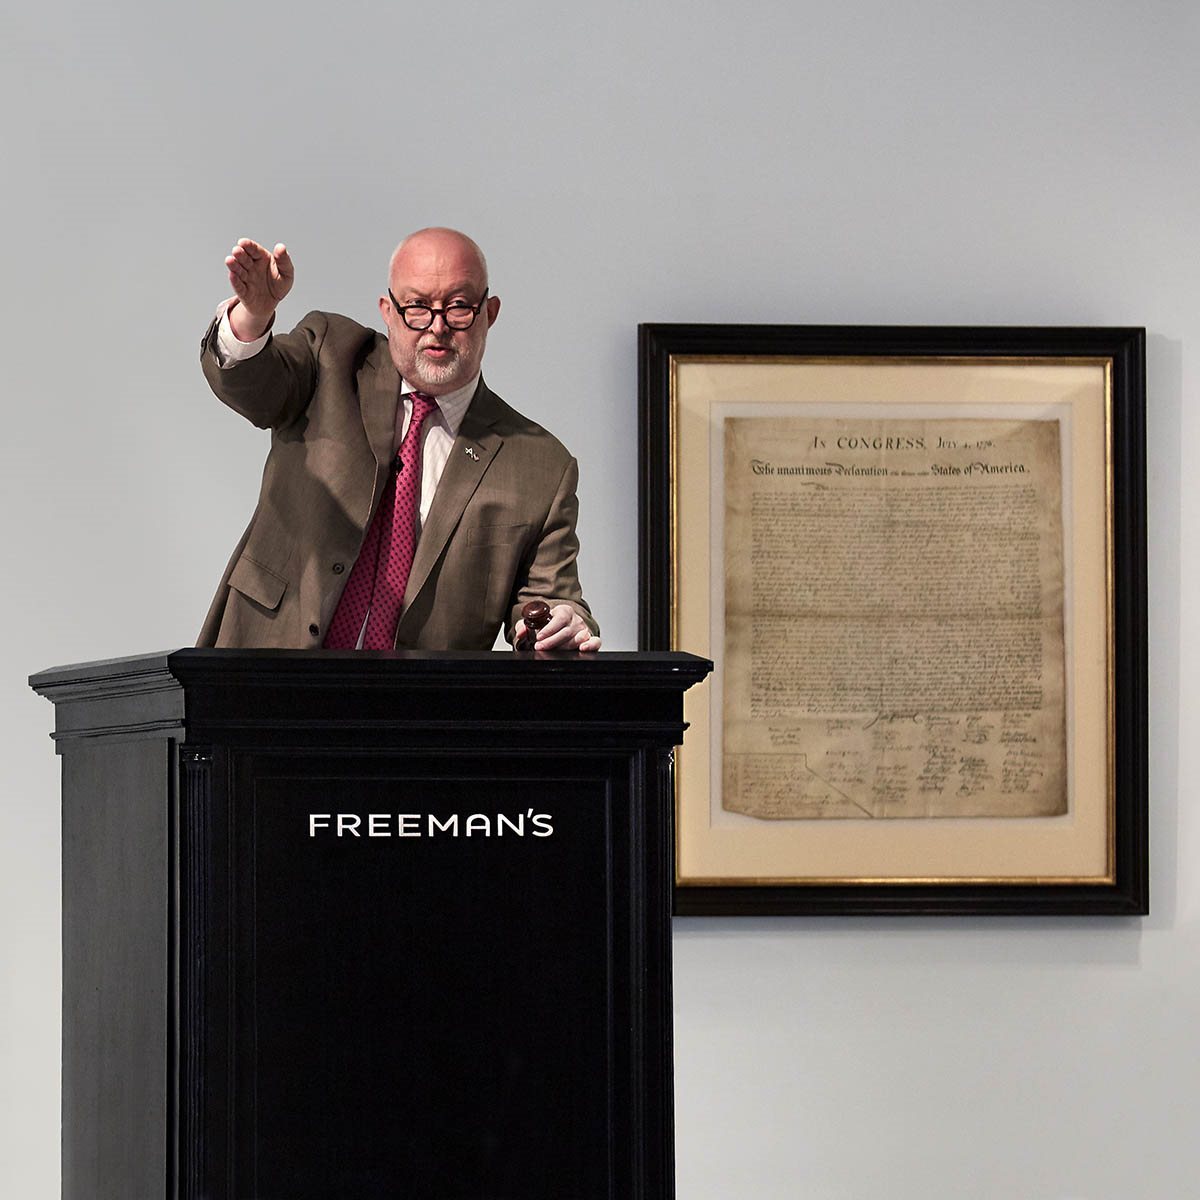 SIGNER’S COPY OF THE DECLARATION OF INDEPENDENCE SELLS FOR HISTORIC $4.42M AT FREEMAN’S, BREAKING WORLD AUCTION RECORD FOR A WILLIAM J. STONE PRINTING